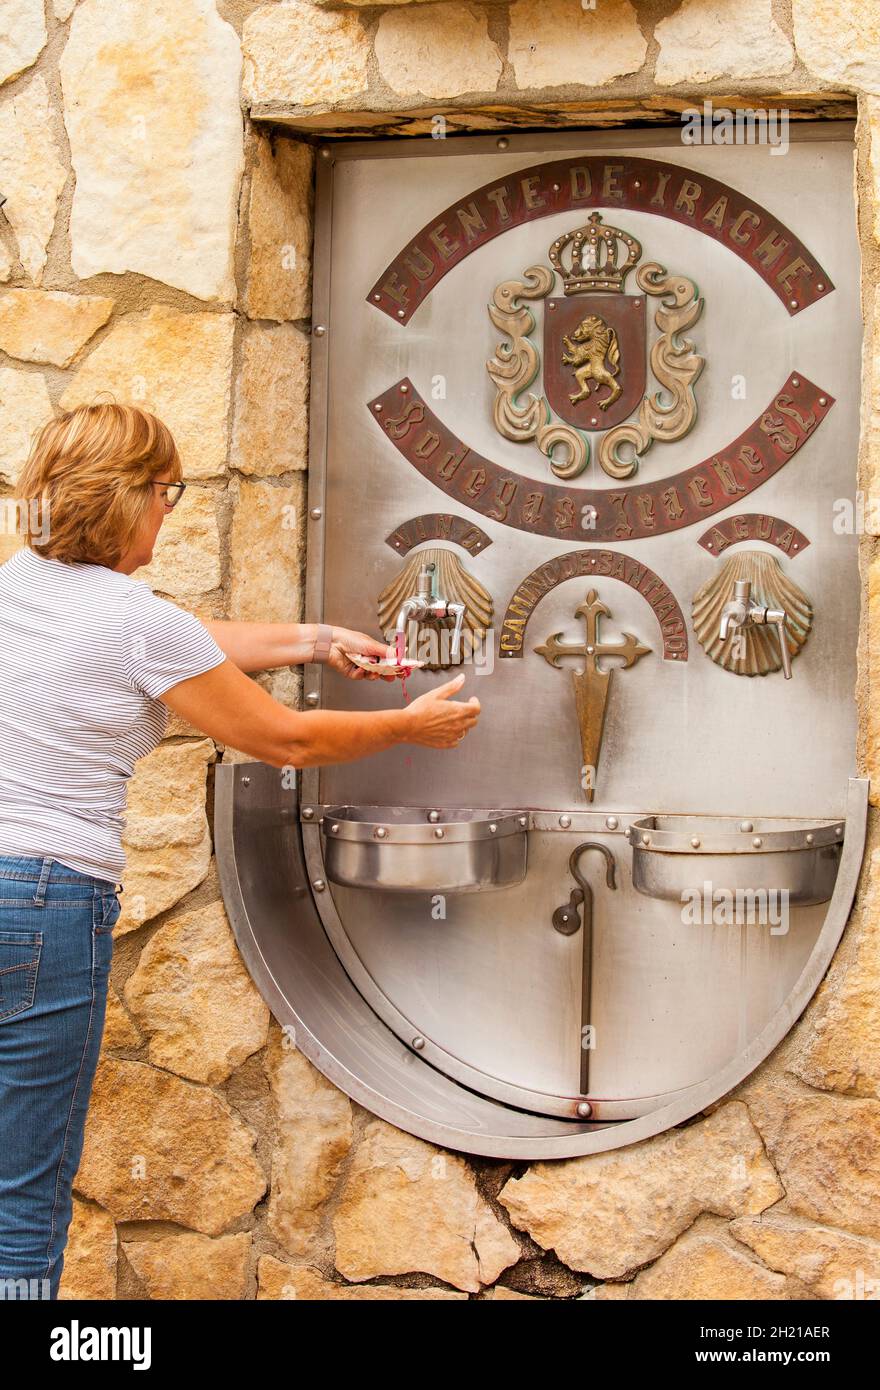 https://c8.alamy.com/comp/2H21AER/pilgrims-using-the-wine-fountain-at-the-bodegas-irache-at-ayegui-navarra-while-walking-the-camino-de-santiago-the-way-of-st-james-pilgrimage-route-2H21AER.jpg